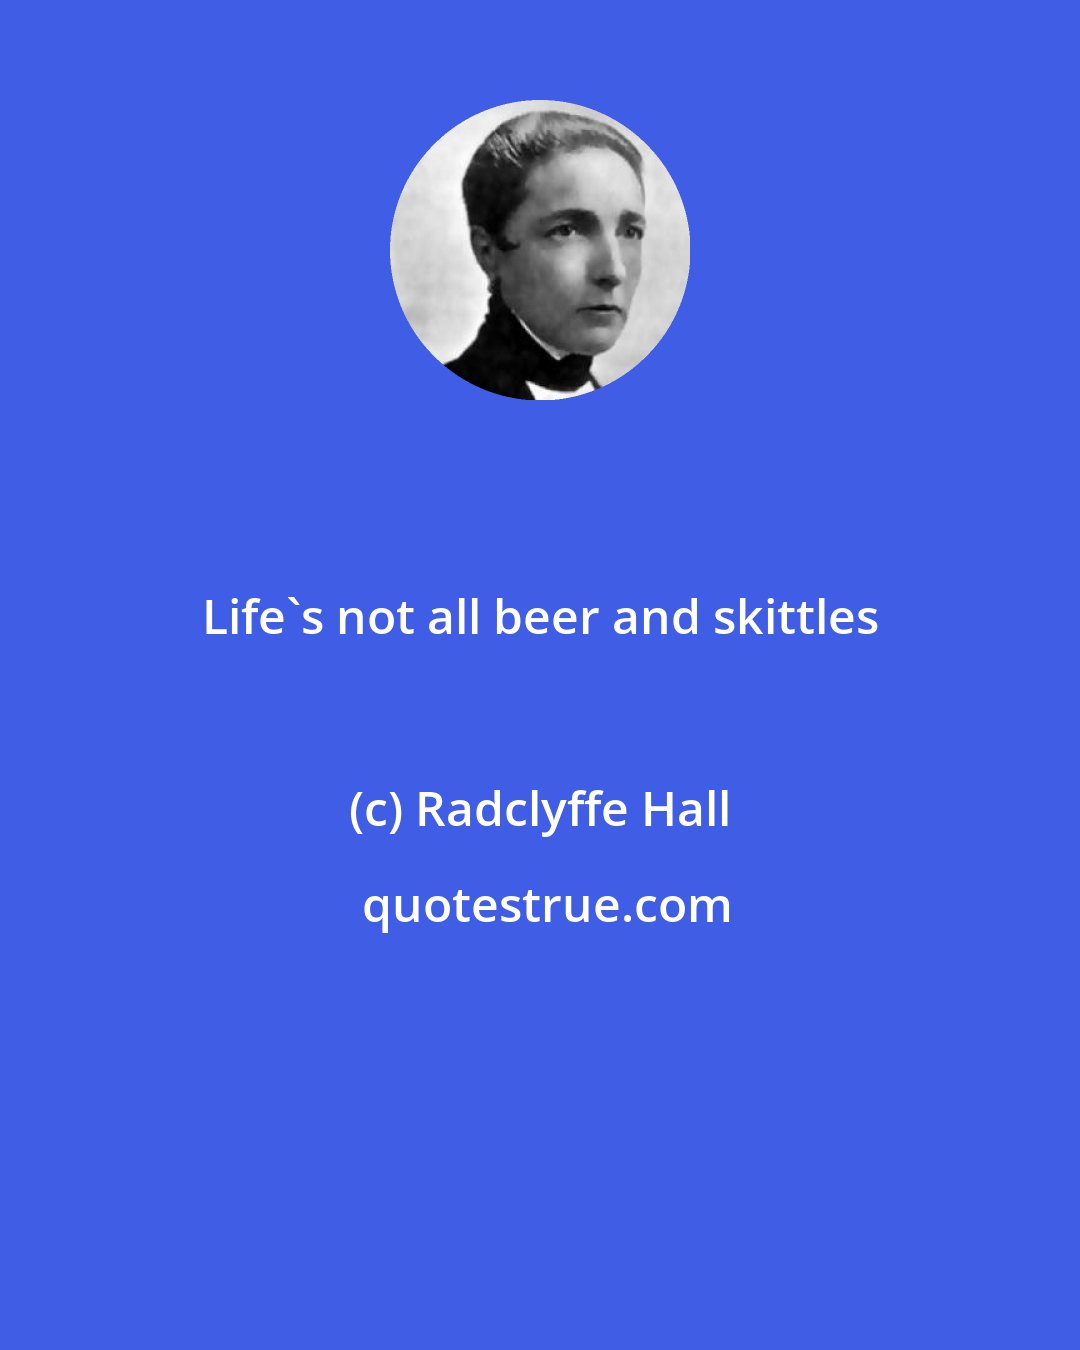 Radclyffe Hall: Life's not all beer and skittles